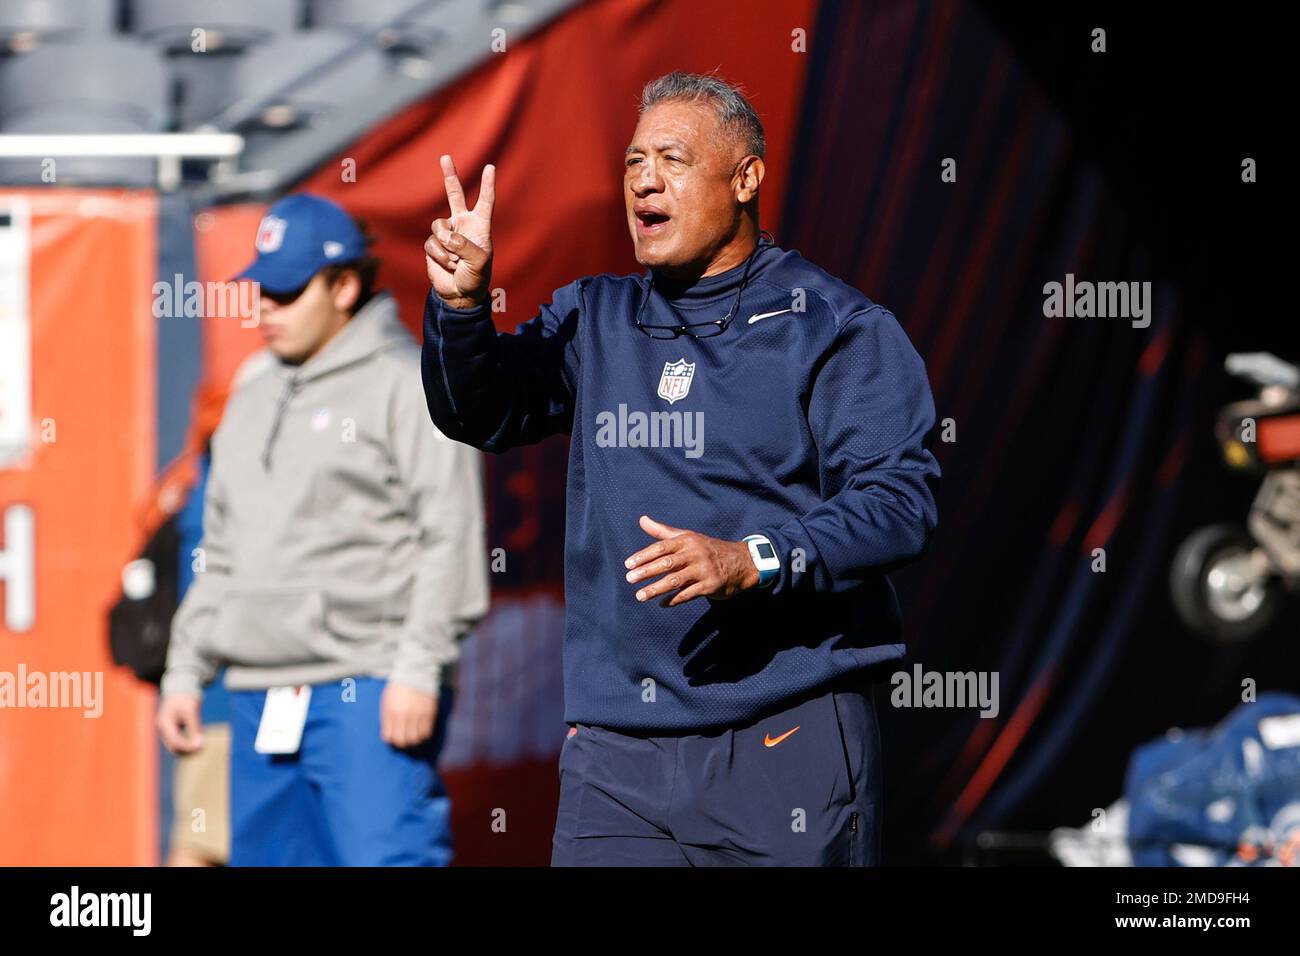 Chicago Bears offensive line coach Juan Castillo signals as he walks on the  field prior to an NFL football game against the Green Bay Packers, Sunday,  Oct. 17, 2021, in Chicago. (AP